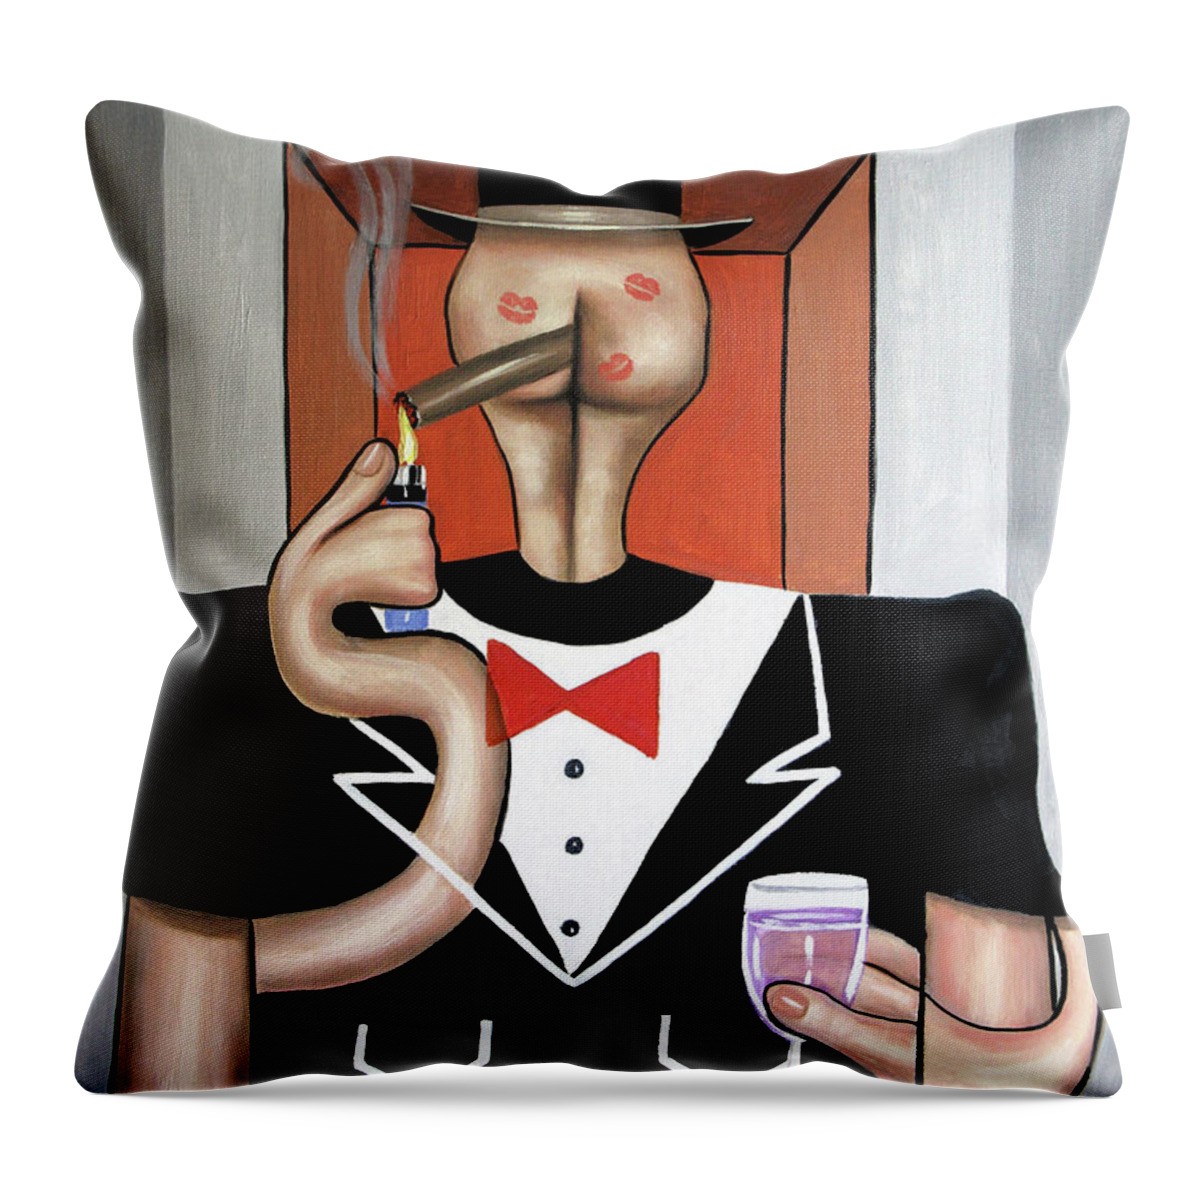 Butthead Throw Pillow featuring the painting Butthead by Anthony Falbo